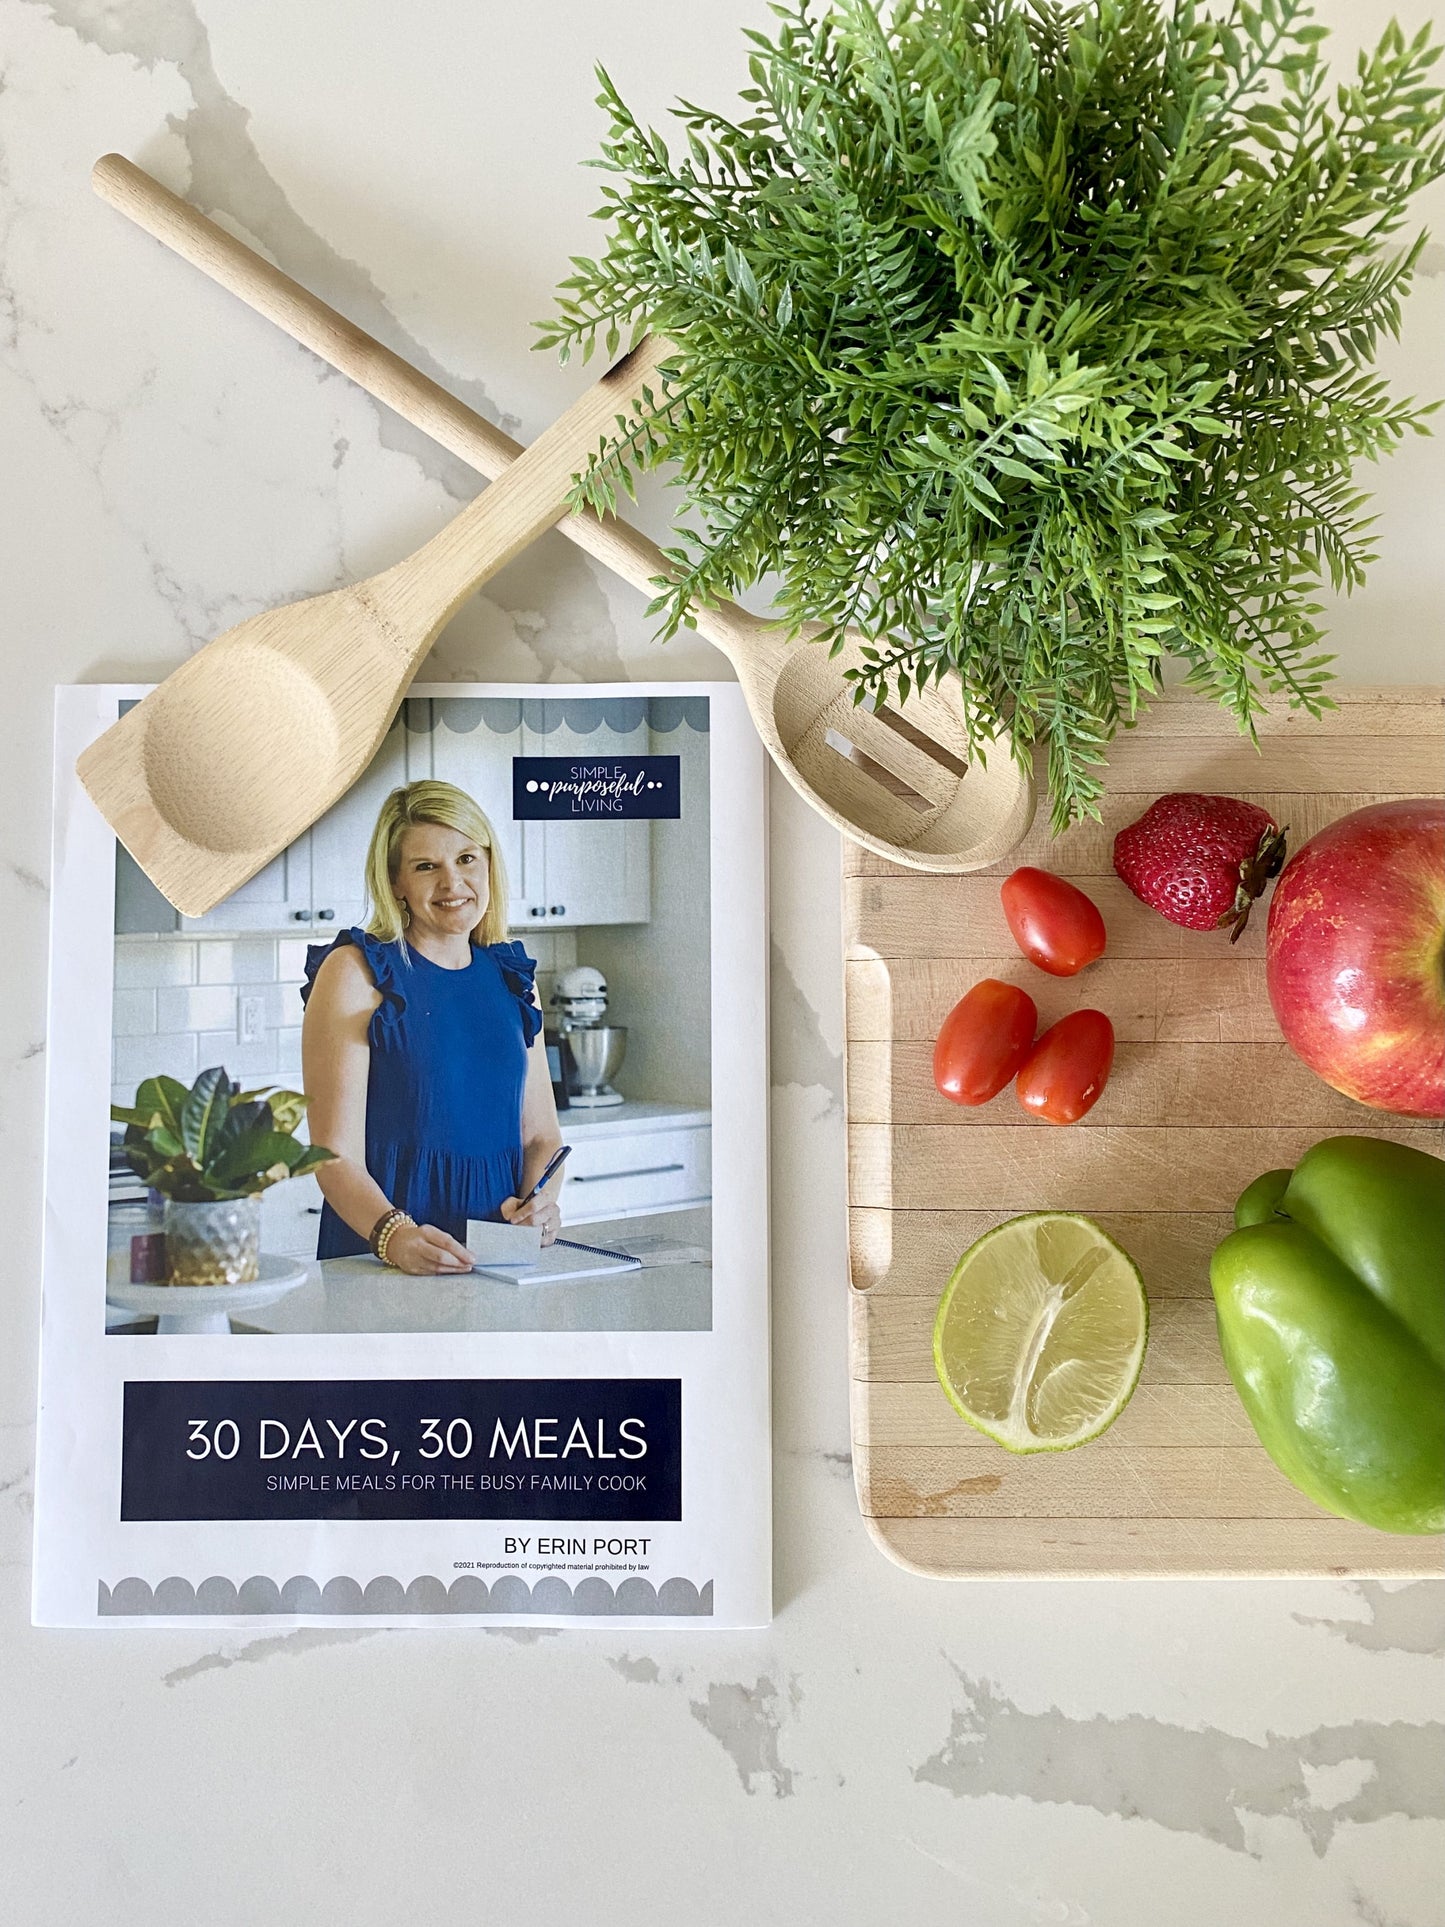 30 days 30 meals easy meal ideas for family-friendly meal planning